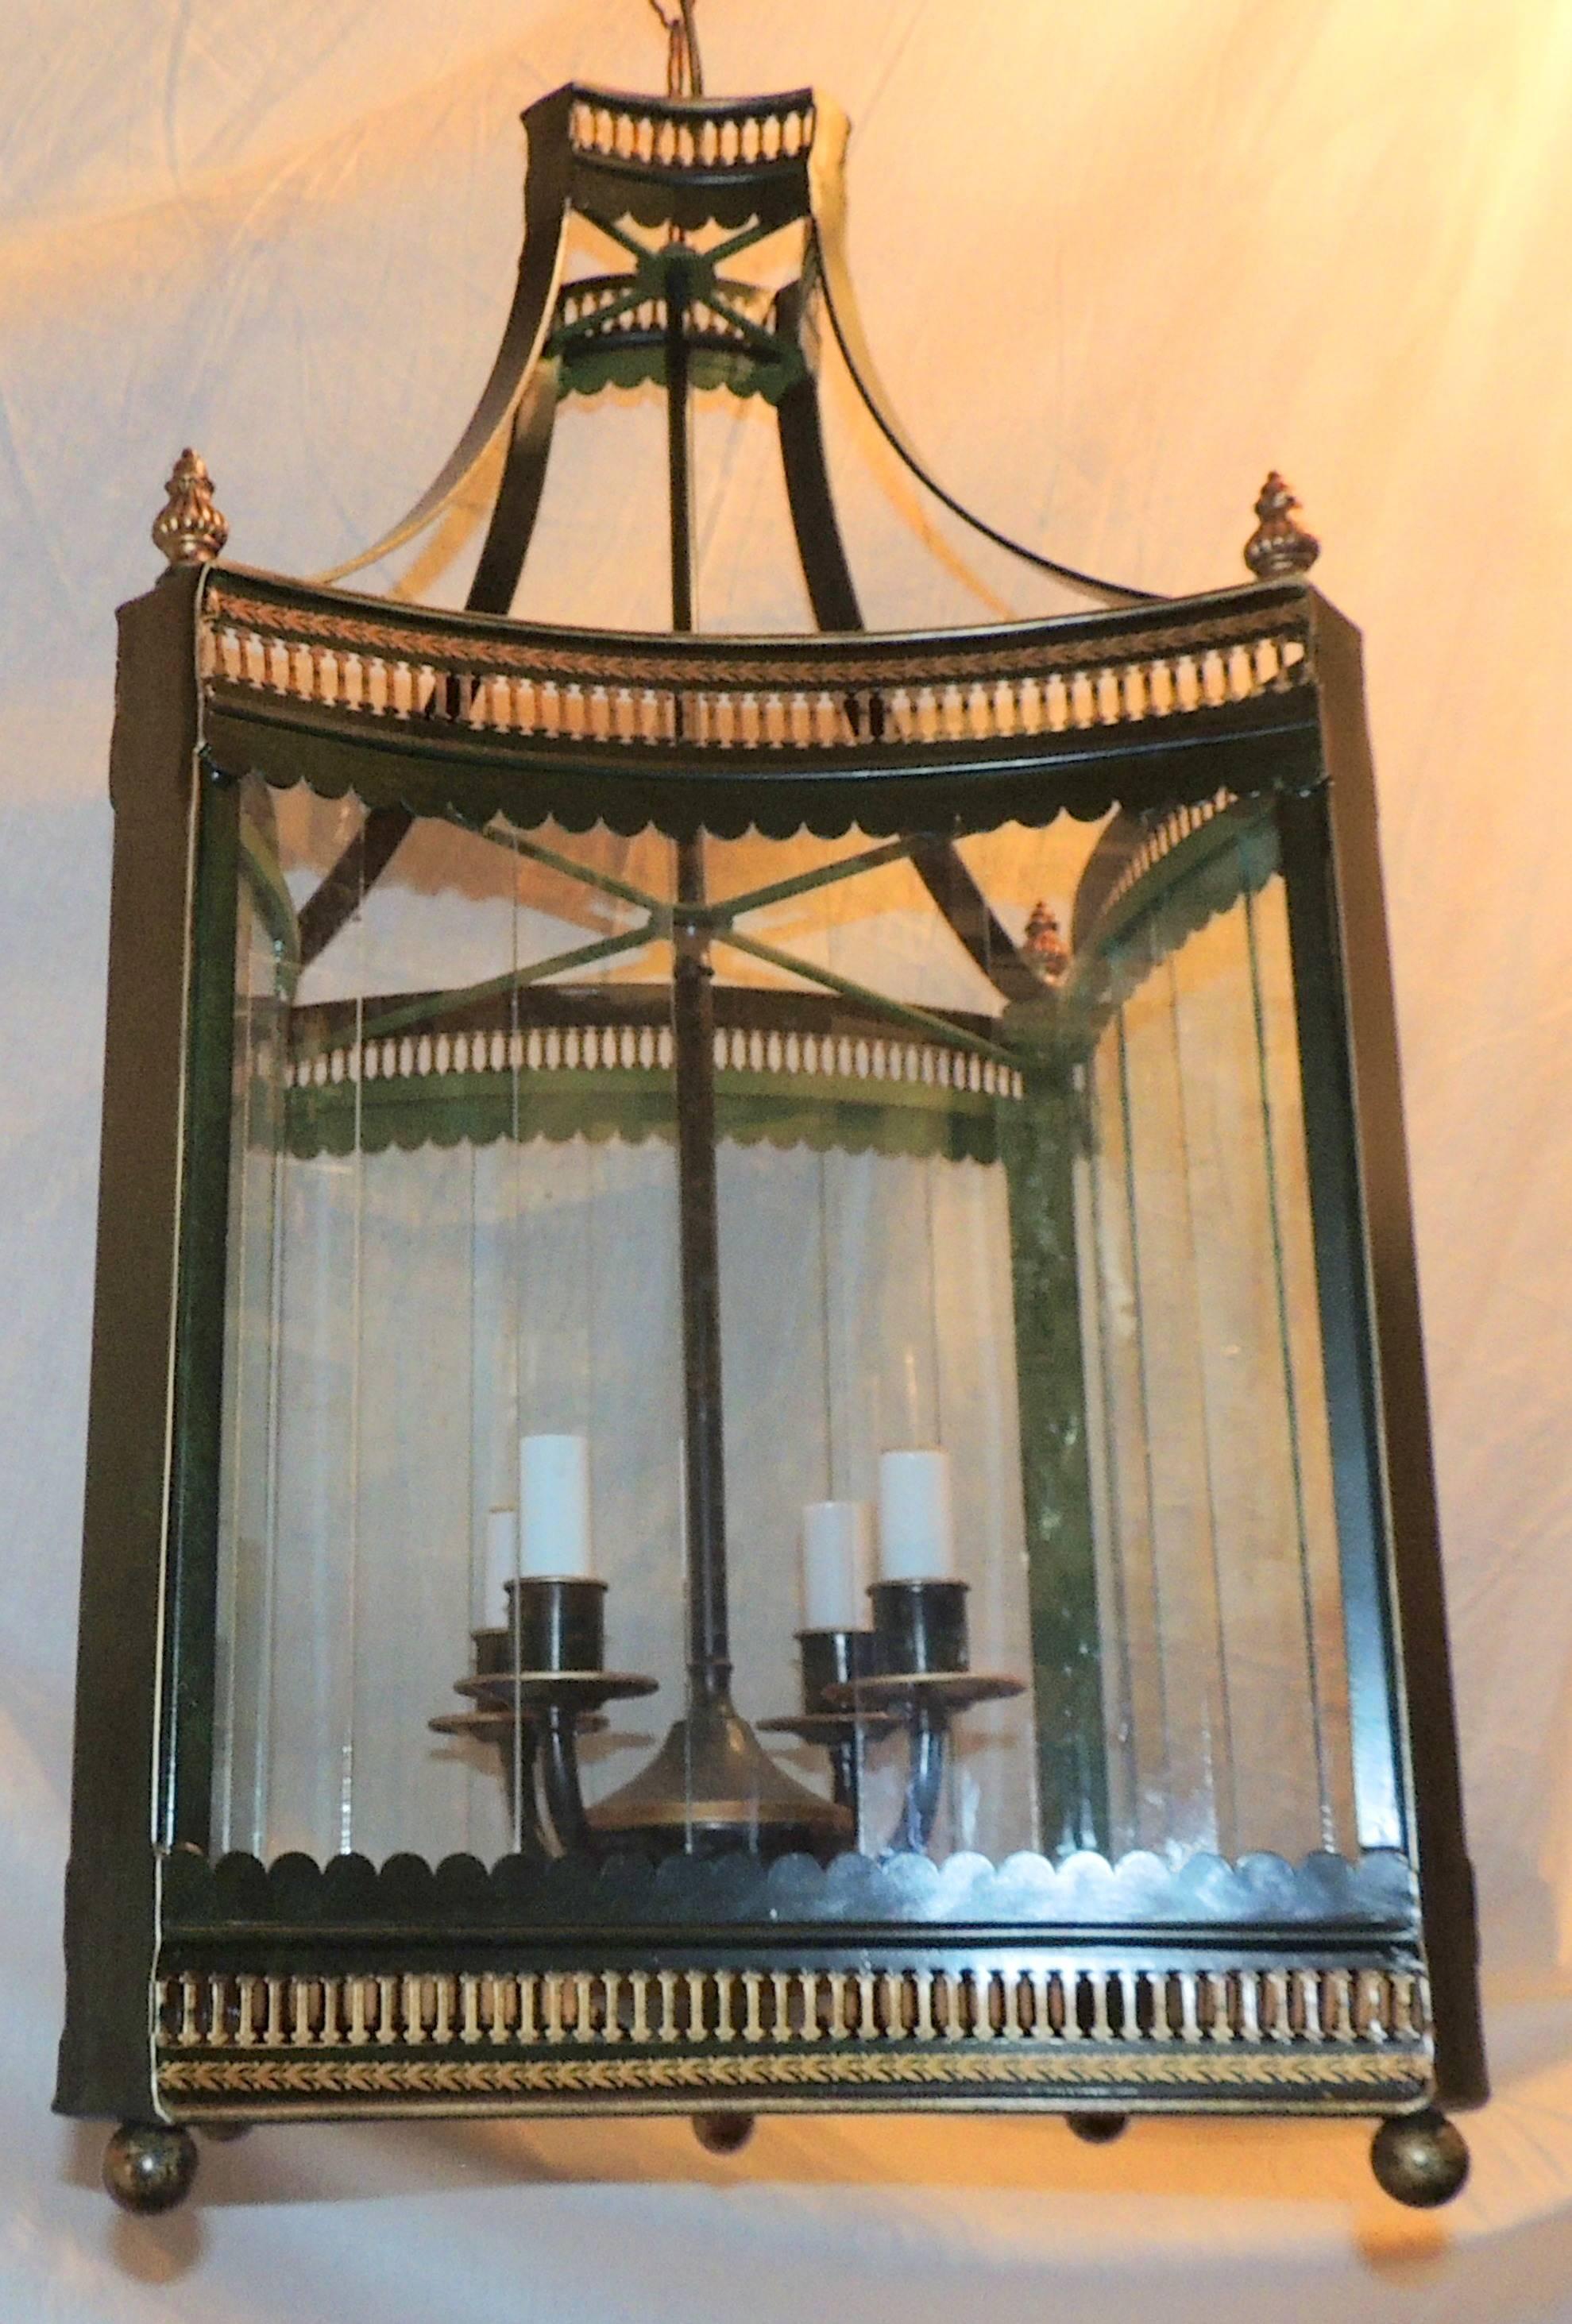 A handsome vintage four-light green tole and hand-painted gilt lantern with curved panel glass. Rewired and ready to install.

Measures: 30